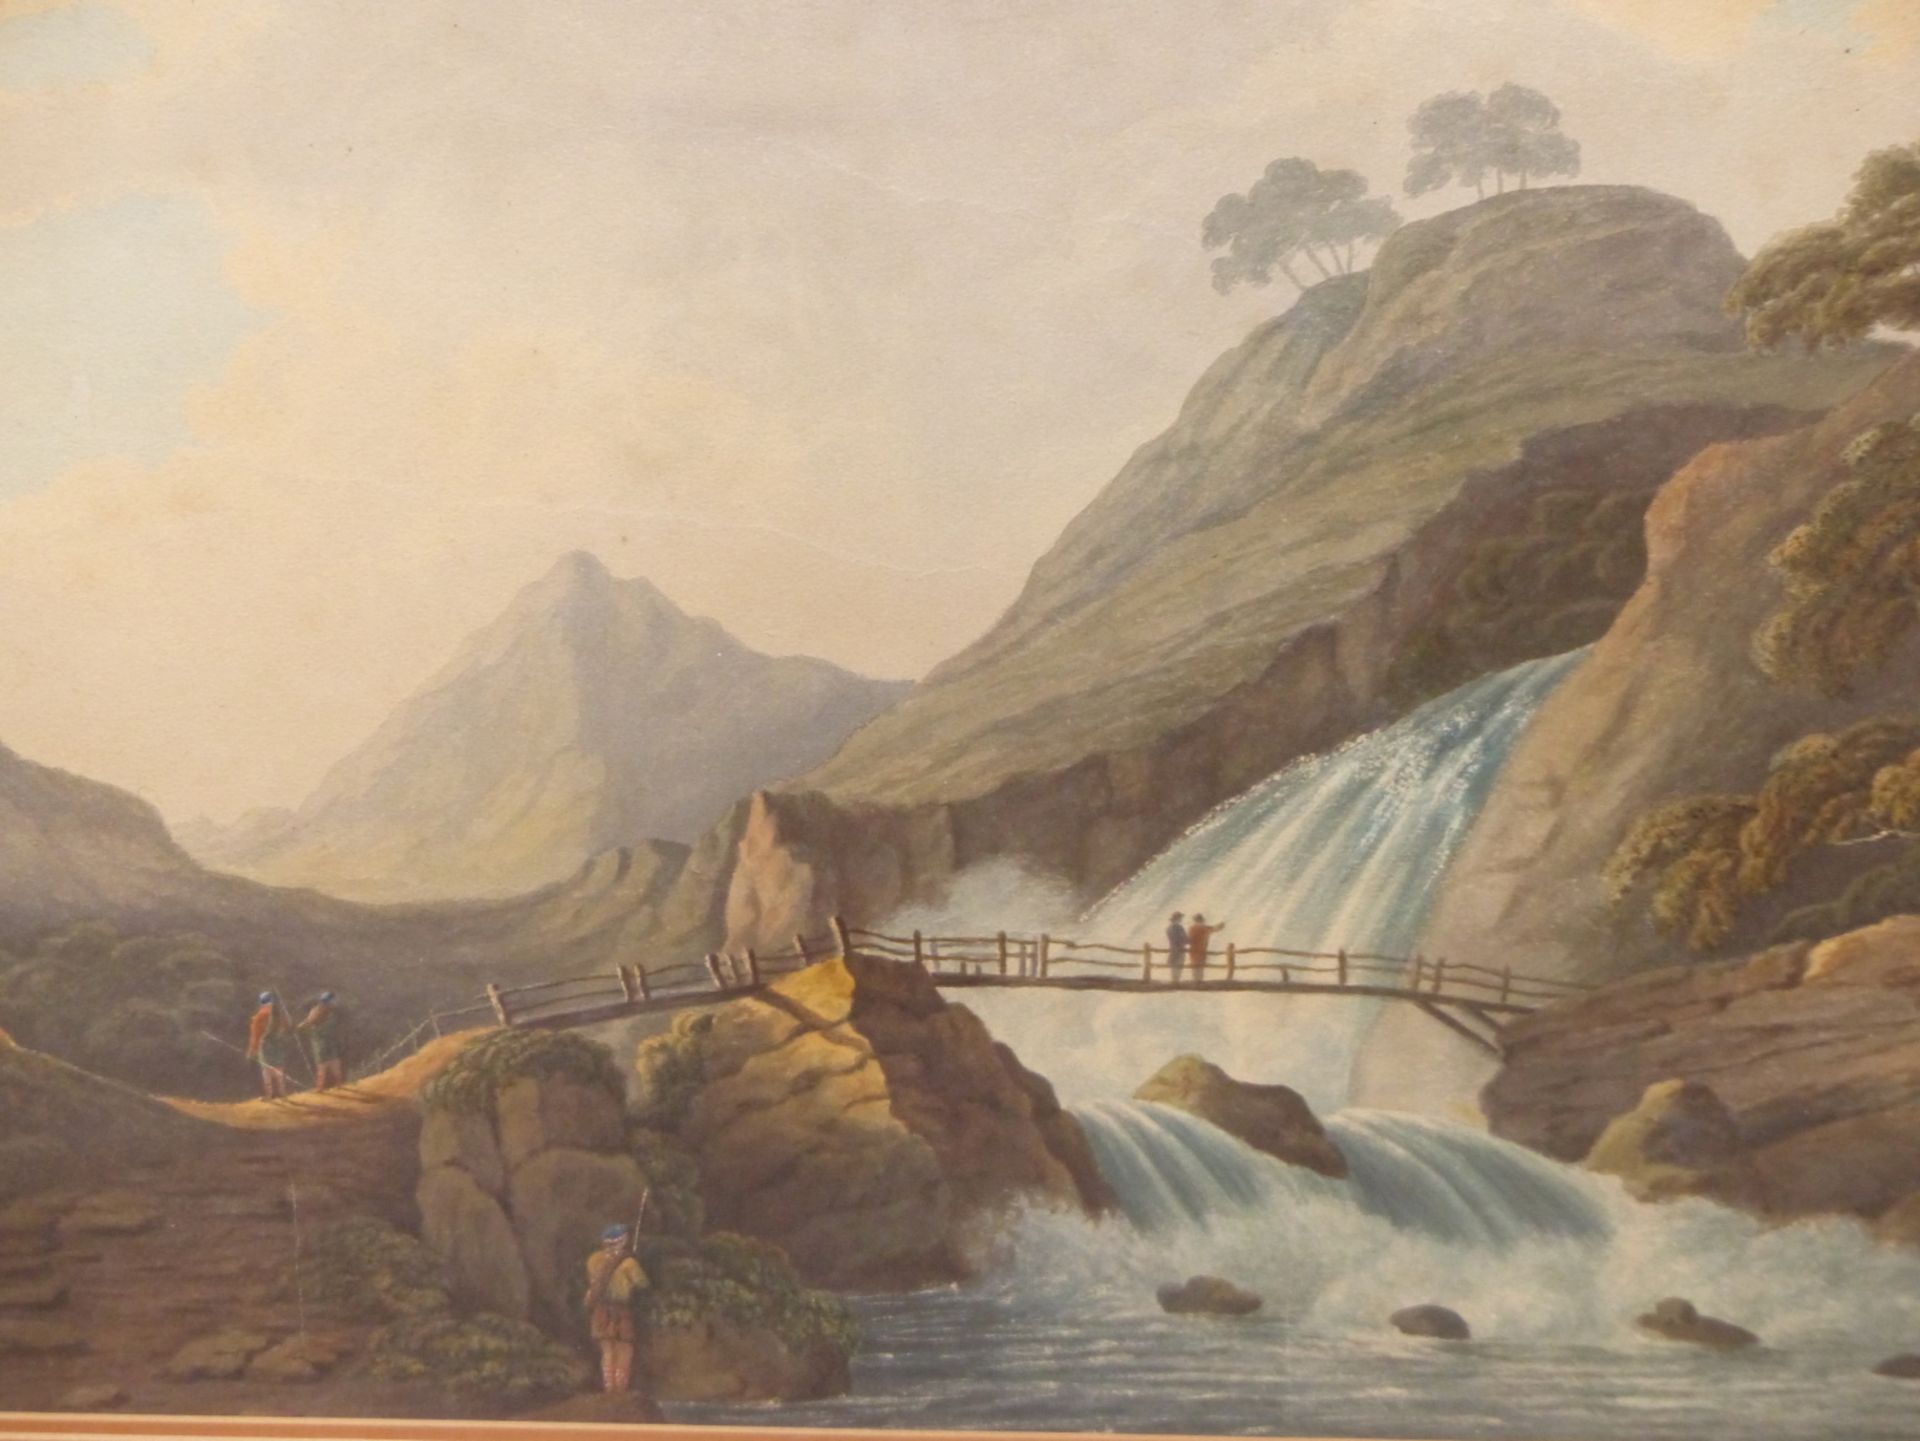 IN THE MANNER OF THOMAS WALMSLEY, BRITISH 1763-1806. VIEW OF WATERFALL AT GLEN CROW, WESTERN